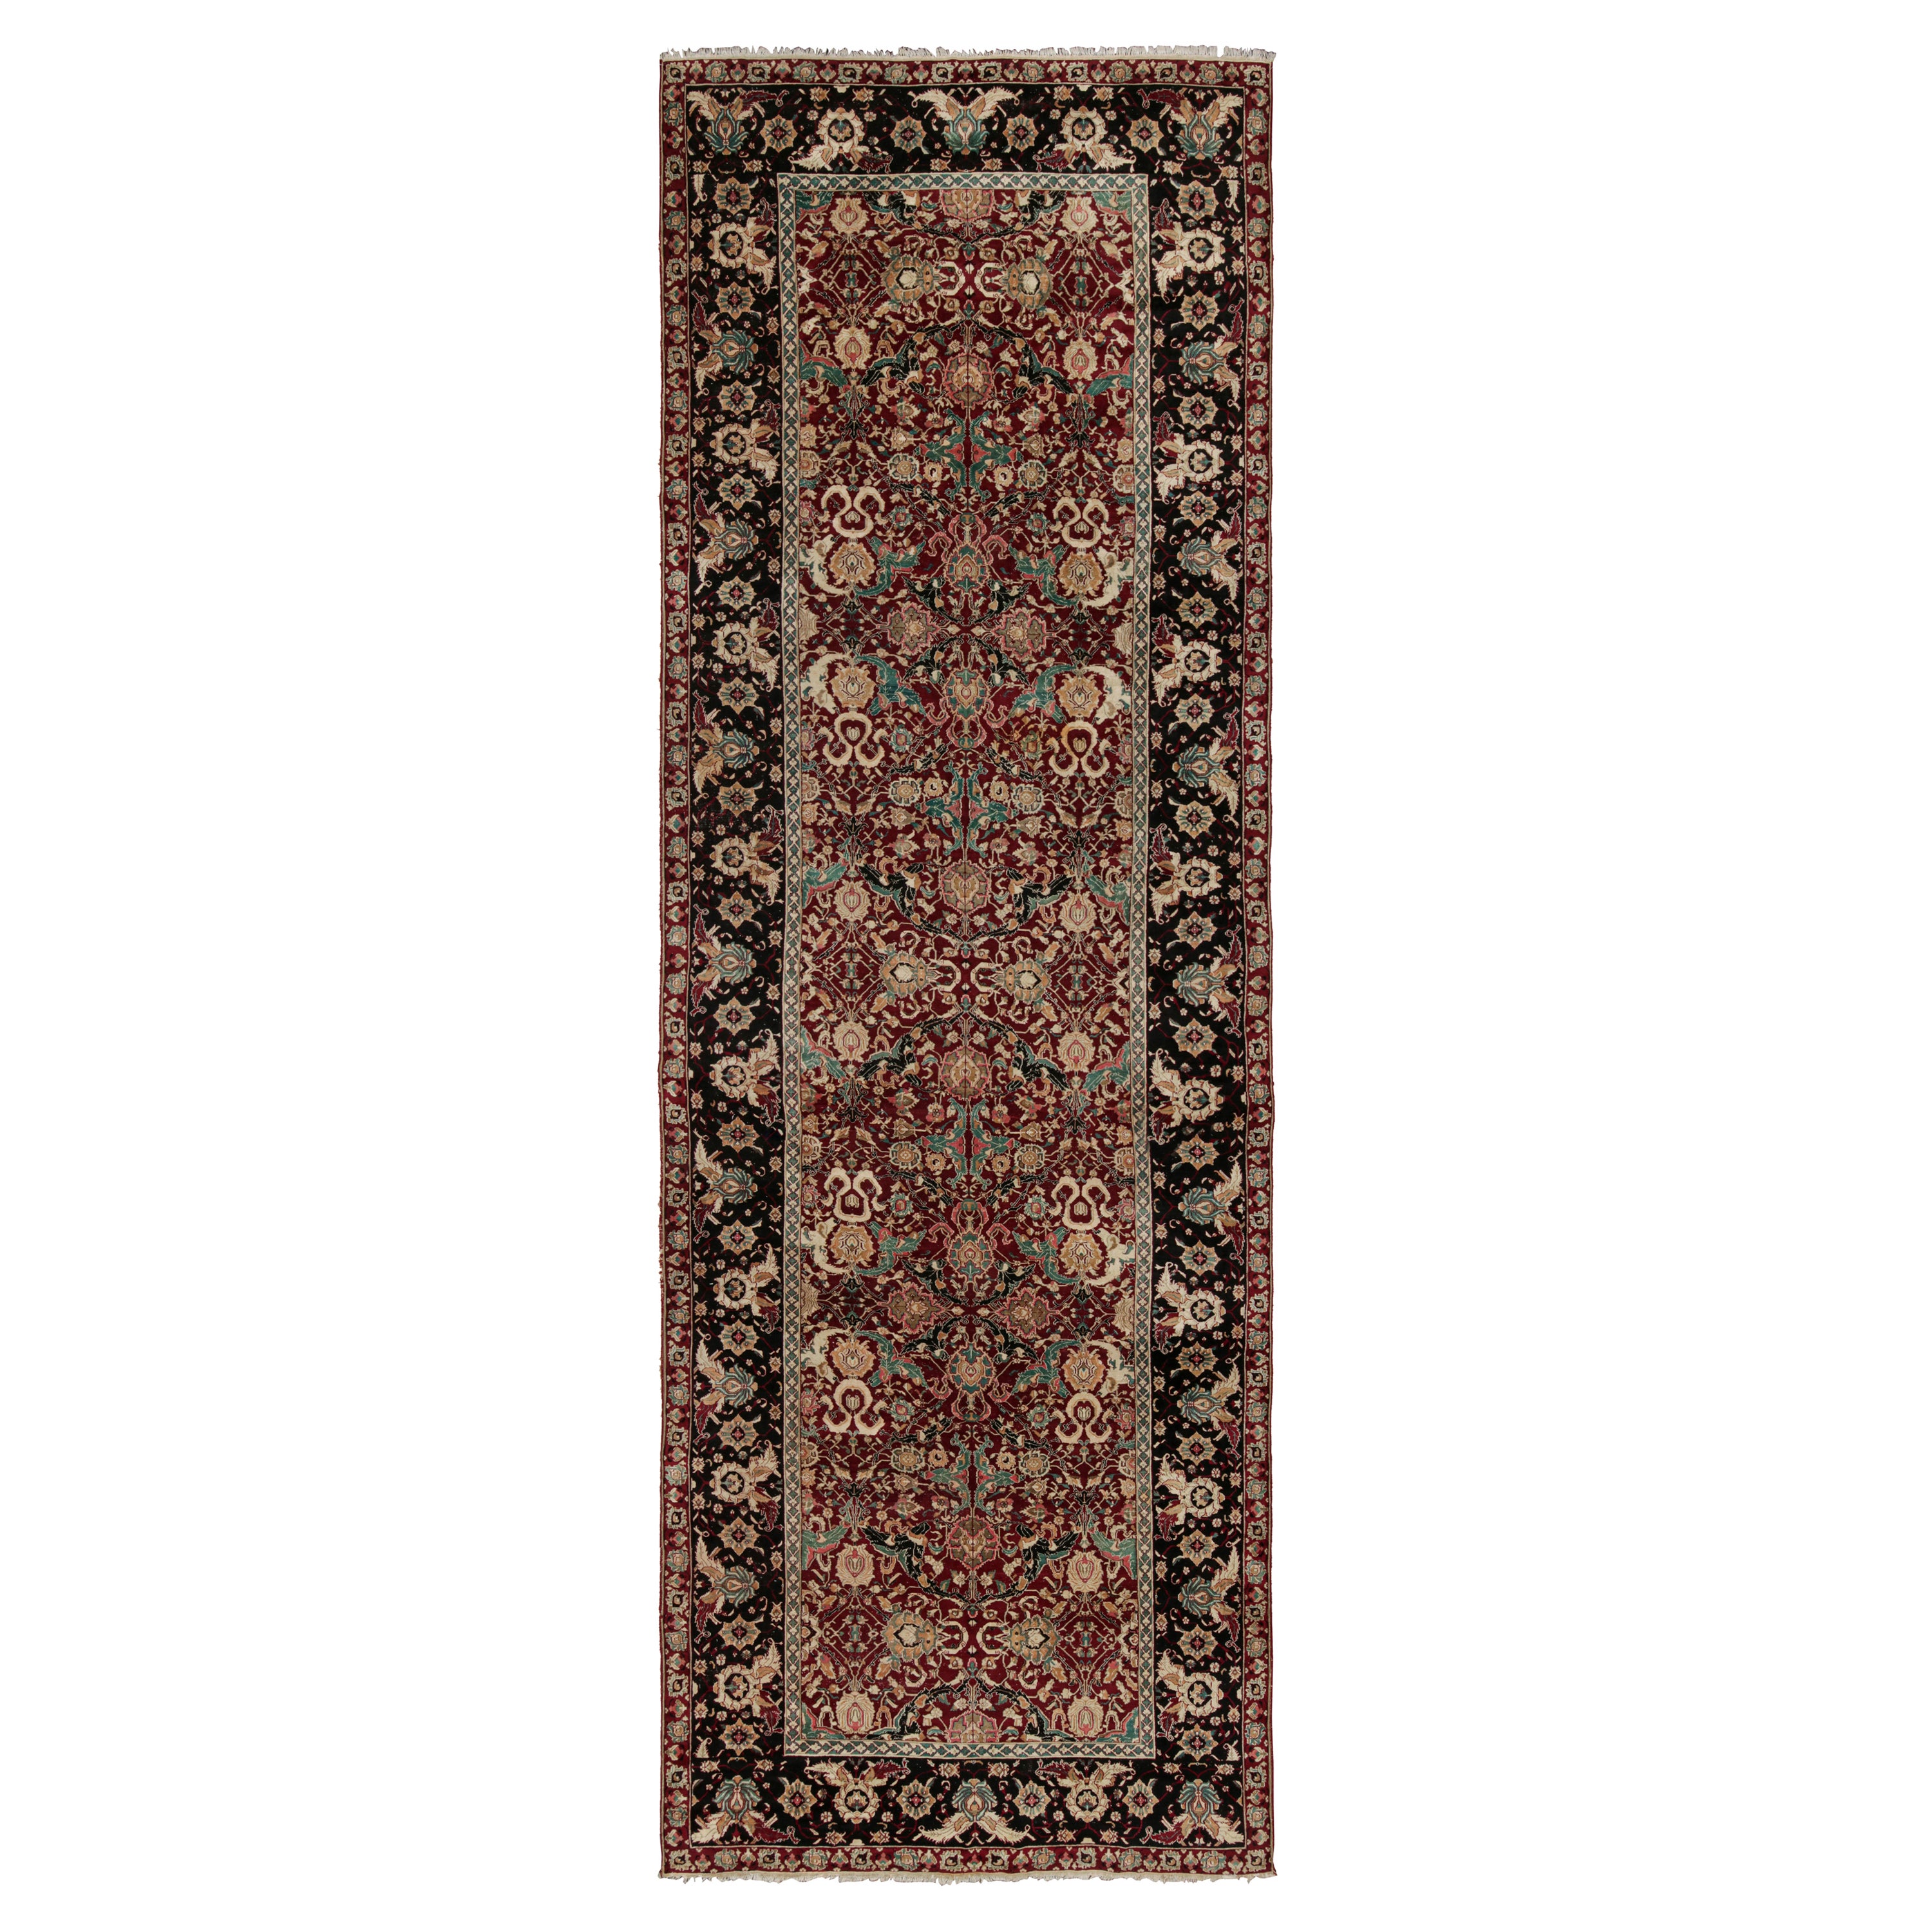 Antique Agra Gallery Runner Jail Rug with Geometric Patterns For Sale